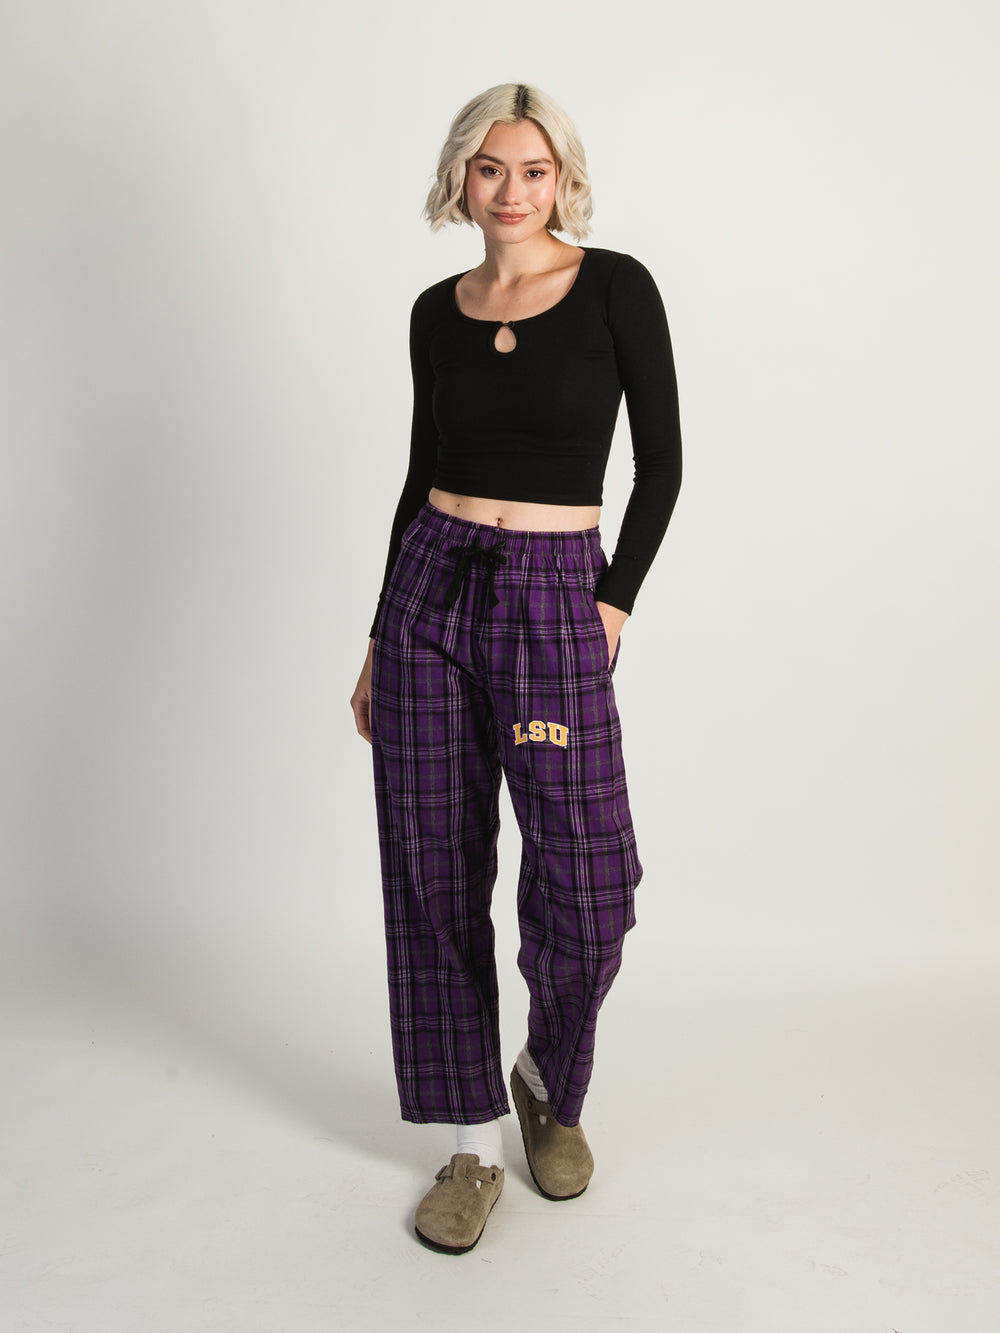 RUSSELL LSU FLANNEL PANT